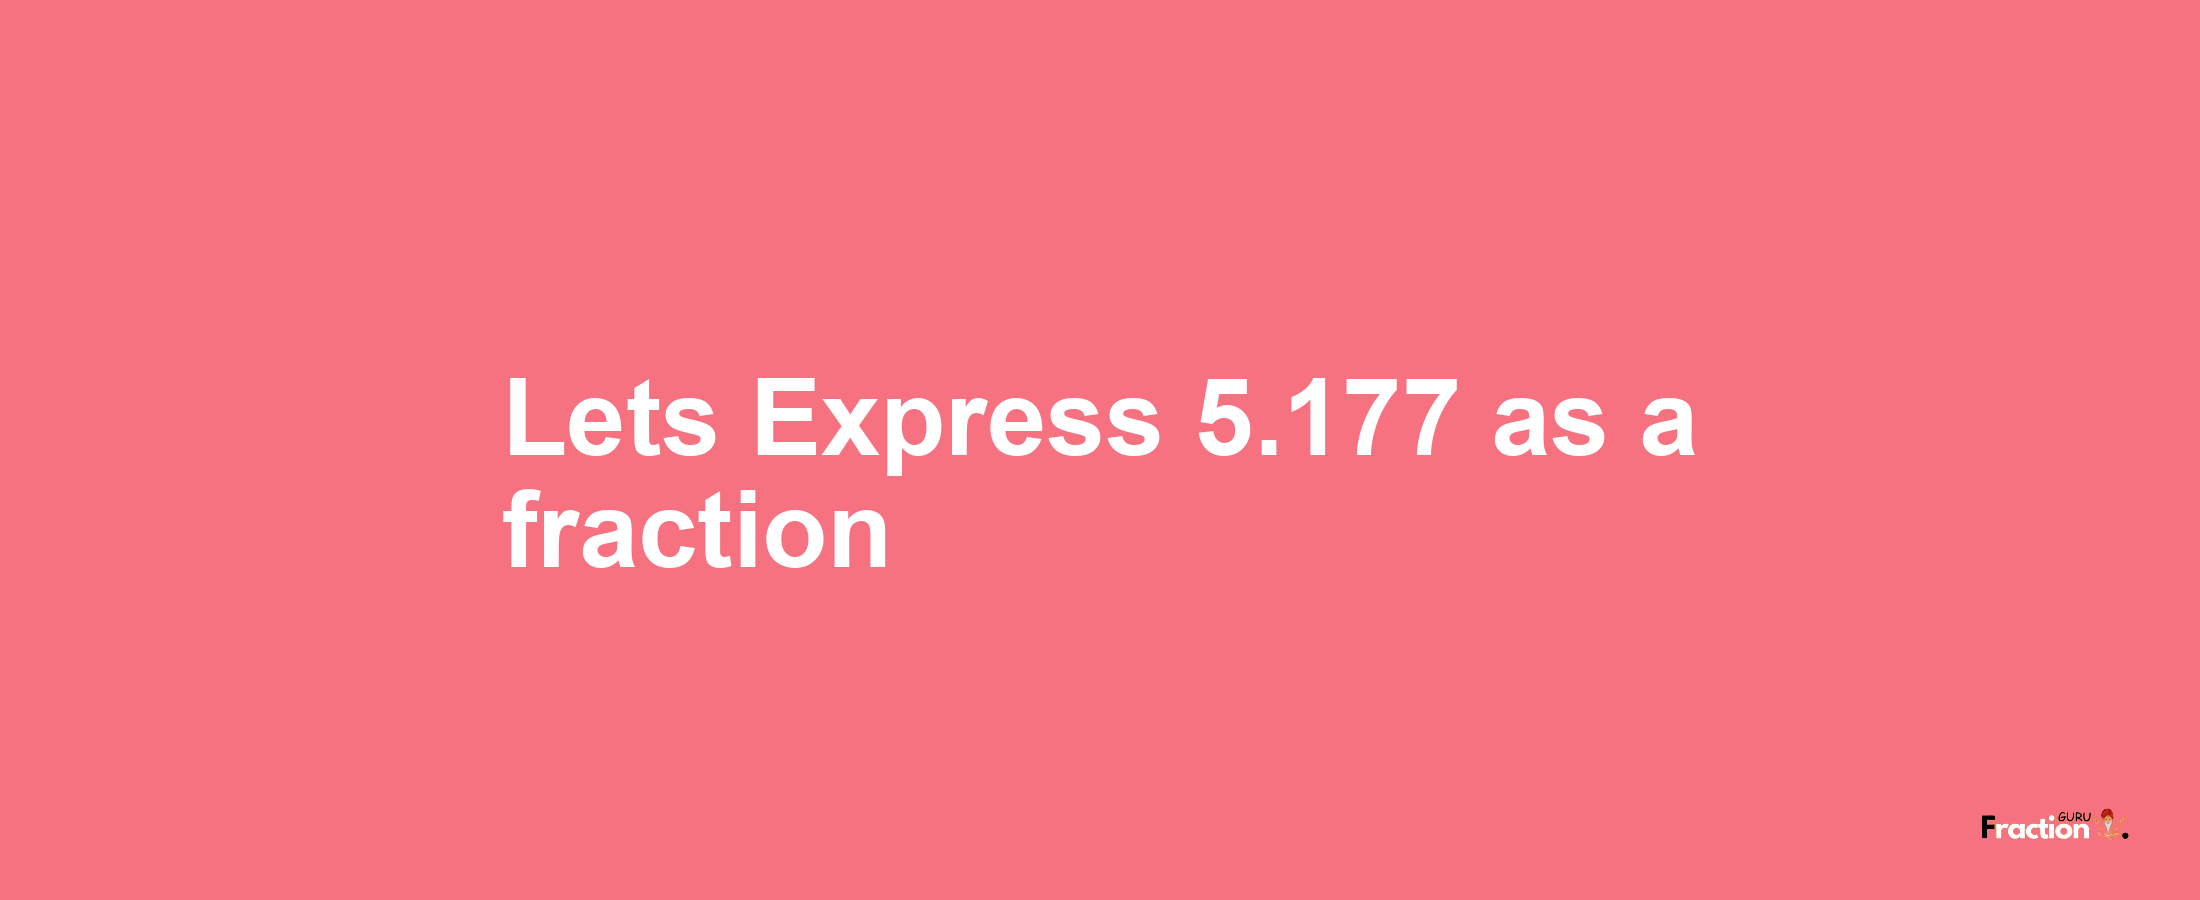 Lets Express 5.177 as afraction